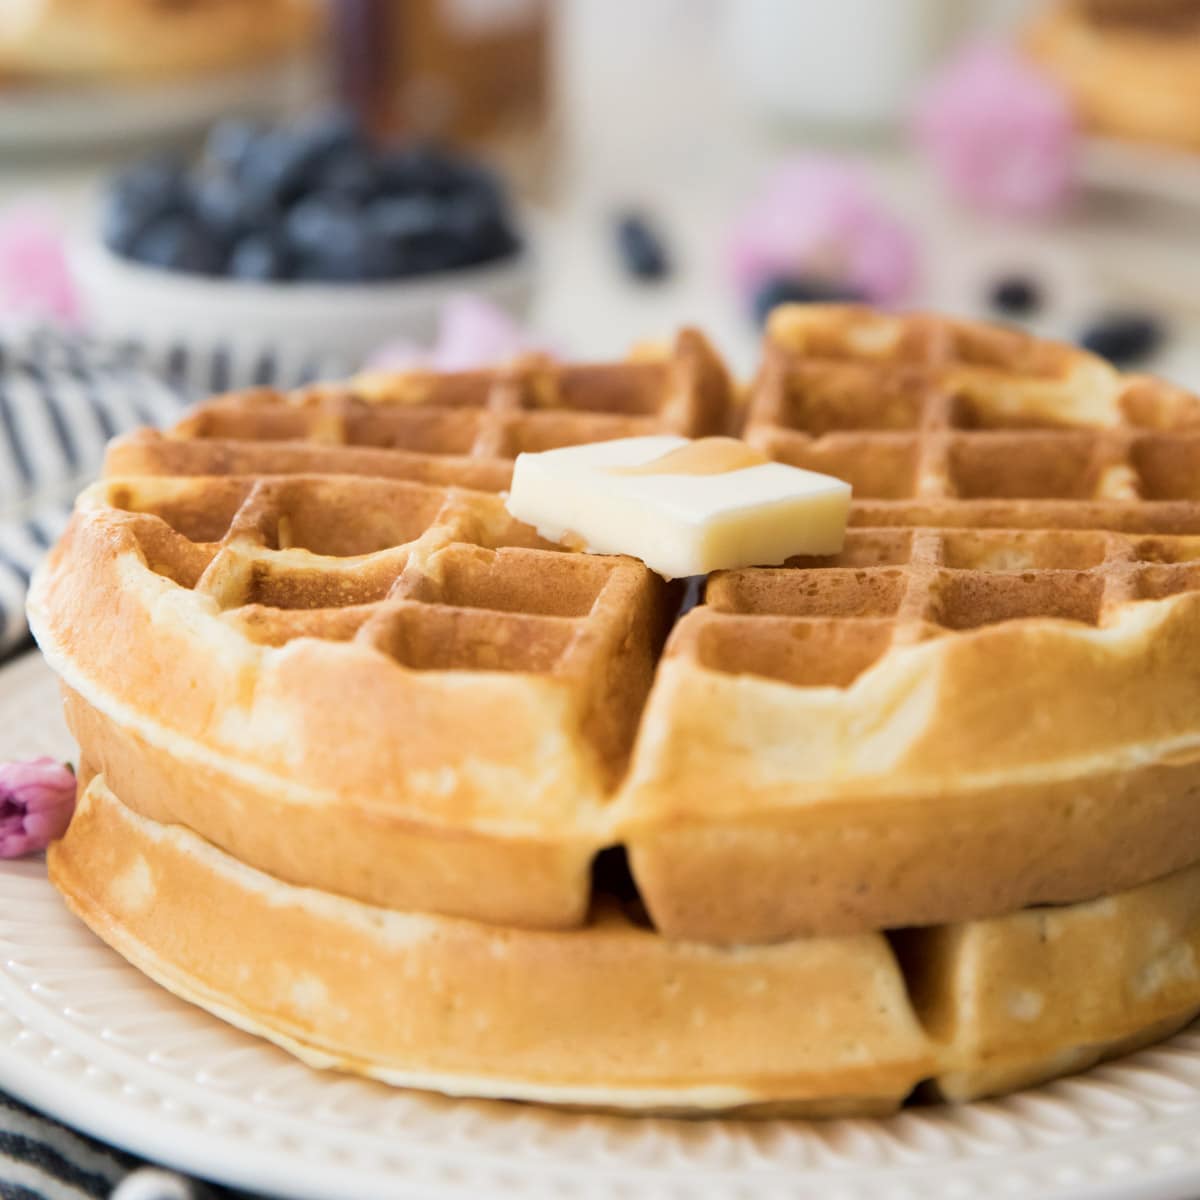 How To Clean a Waffle Iron - Savory Nothings